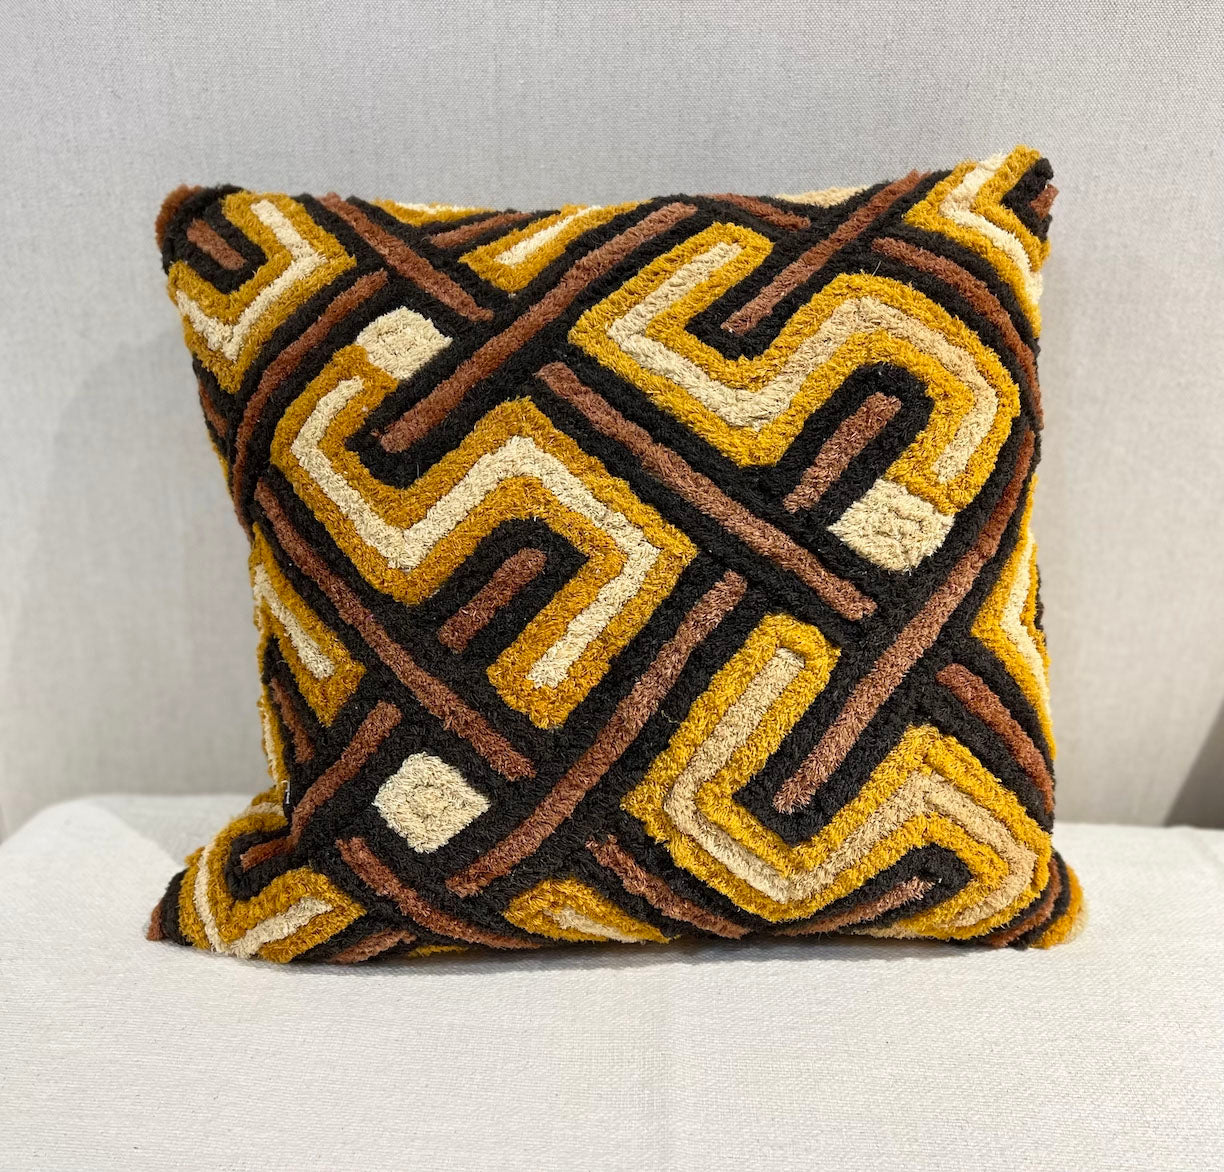 One-of-a-kind Kuba Cloth pillows from The Congo